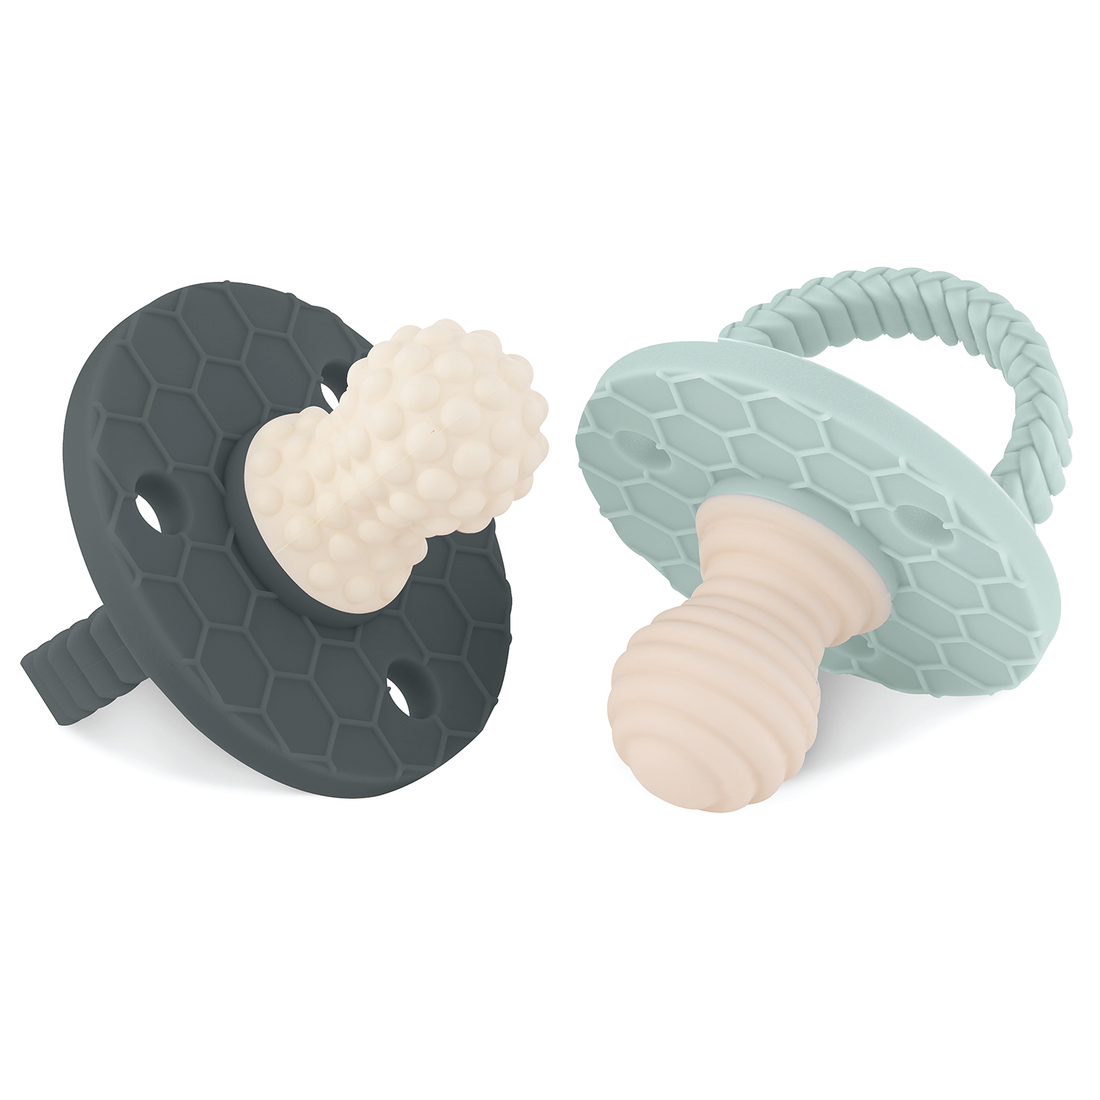 SoothiPop Silicone Teething Pacifier Round Shaped (2 Pack) - Space Gray and Mint